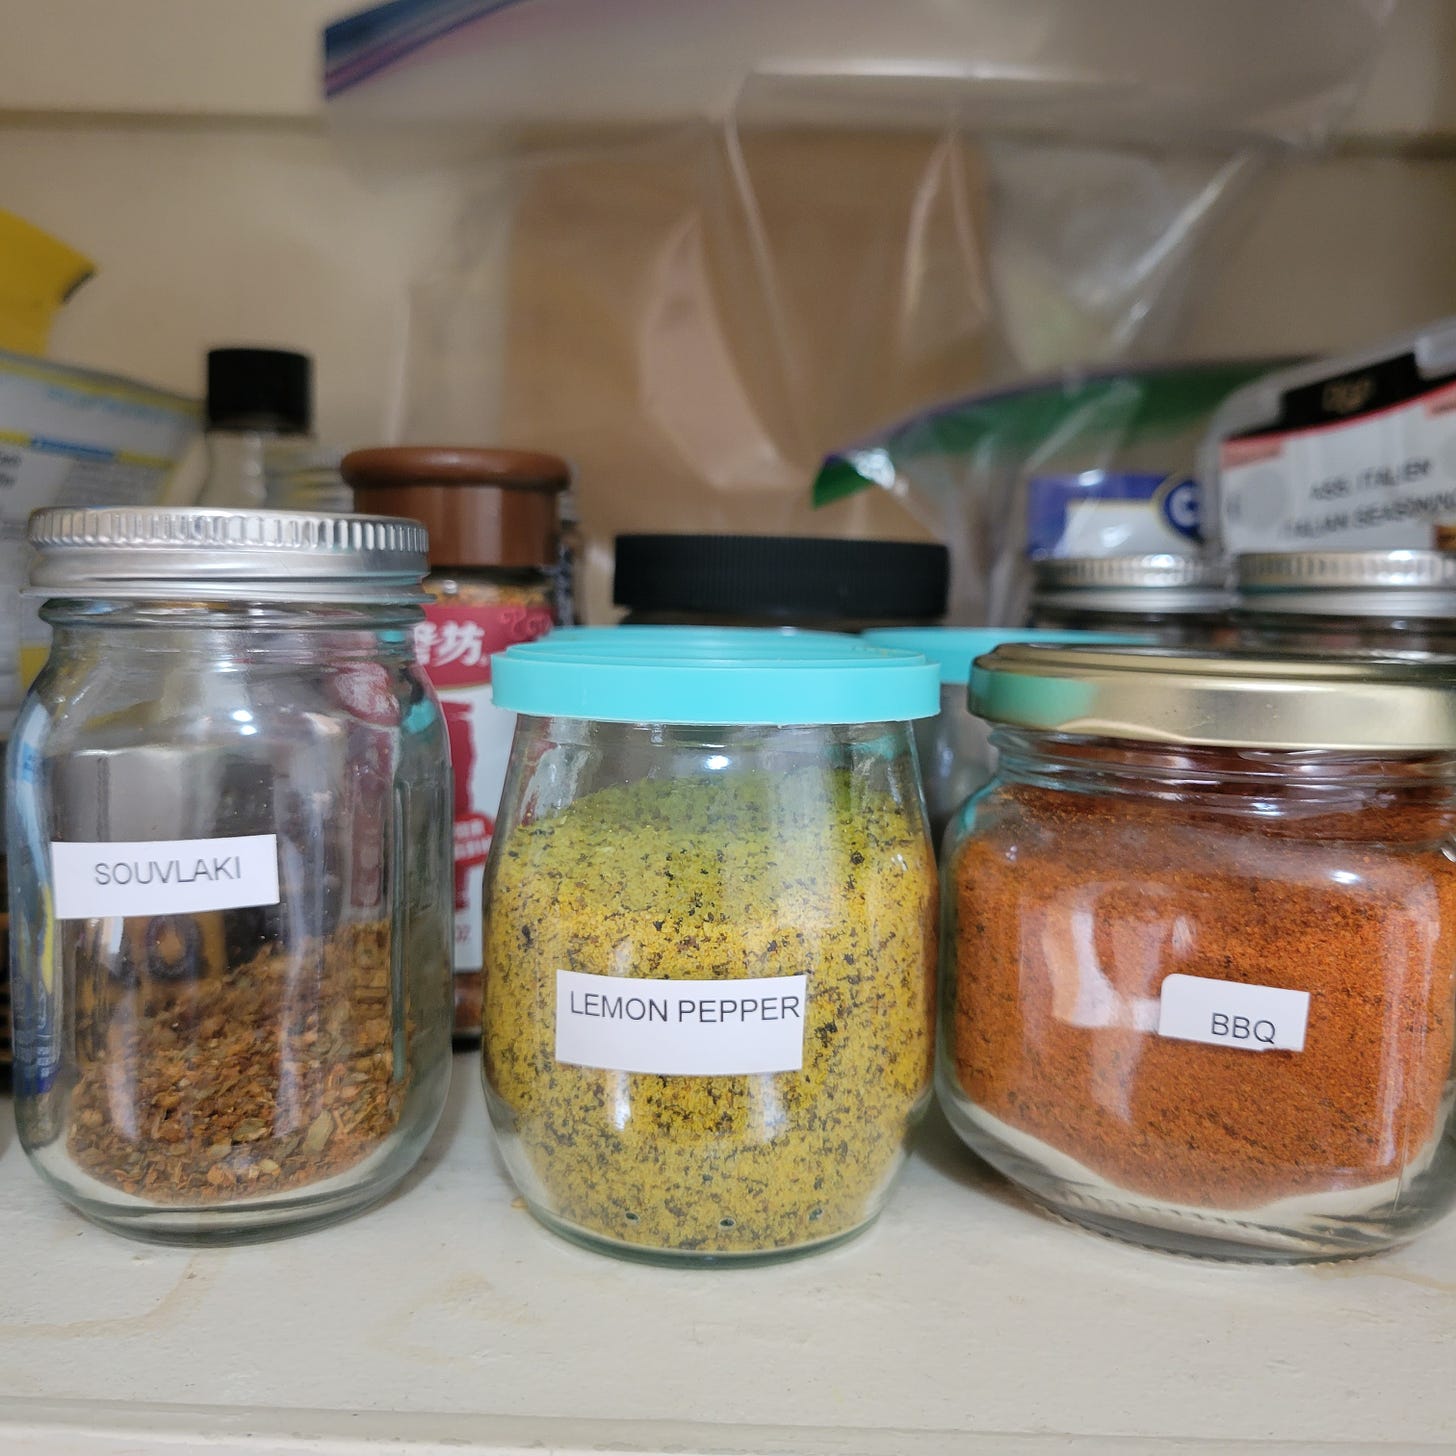 three class jars with labels for souvlaki, lemon pepper and bbq